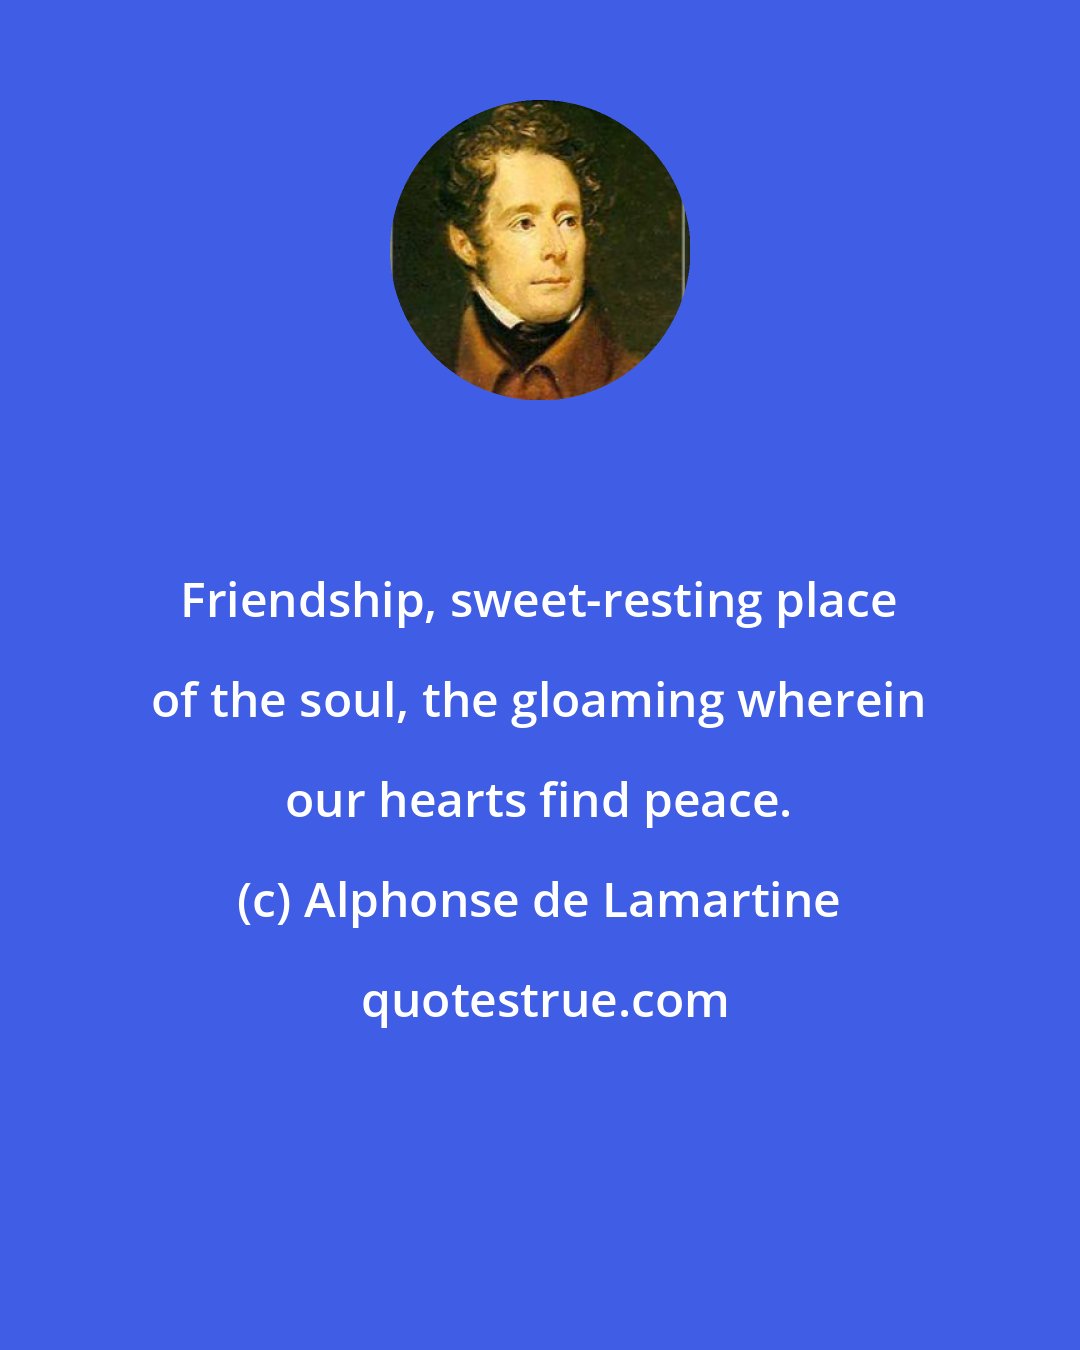 Alphonse de Lamartine: Friendship, sweet-resting place of the soul, the gloaming wherein our hearts find peace.